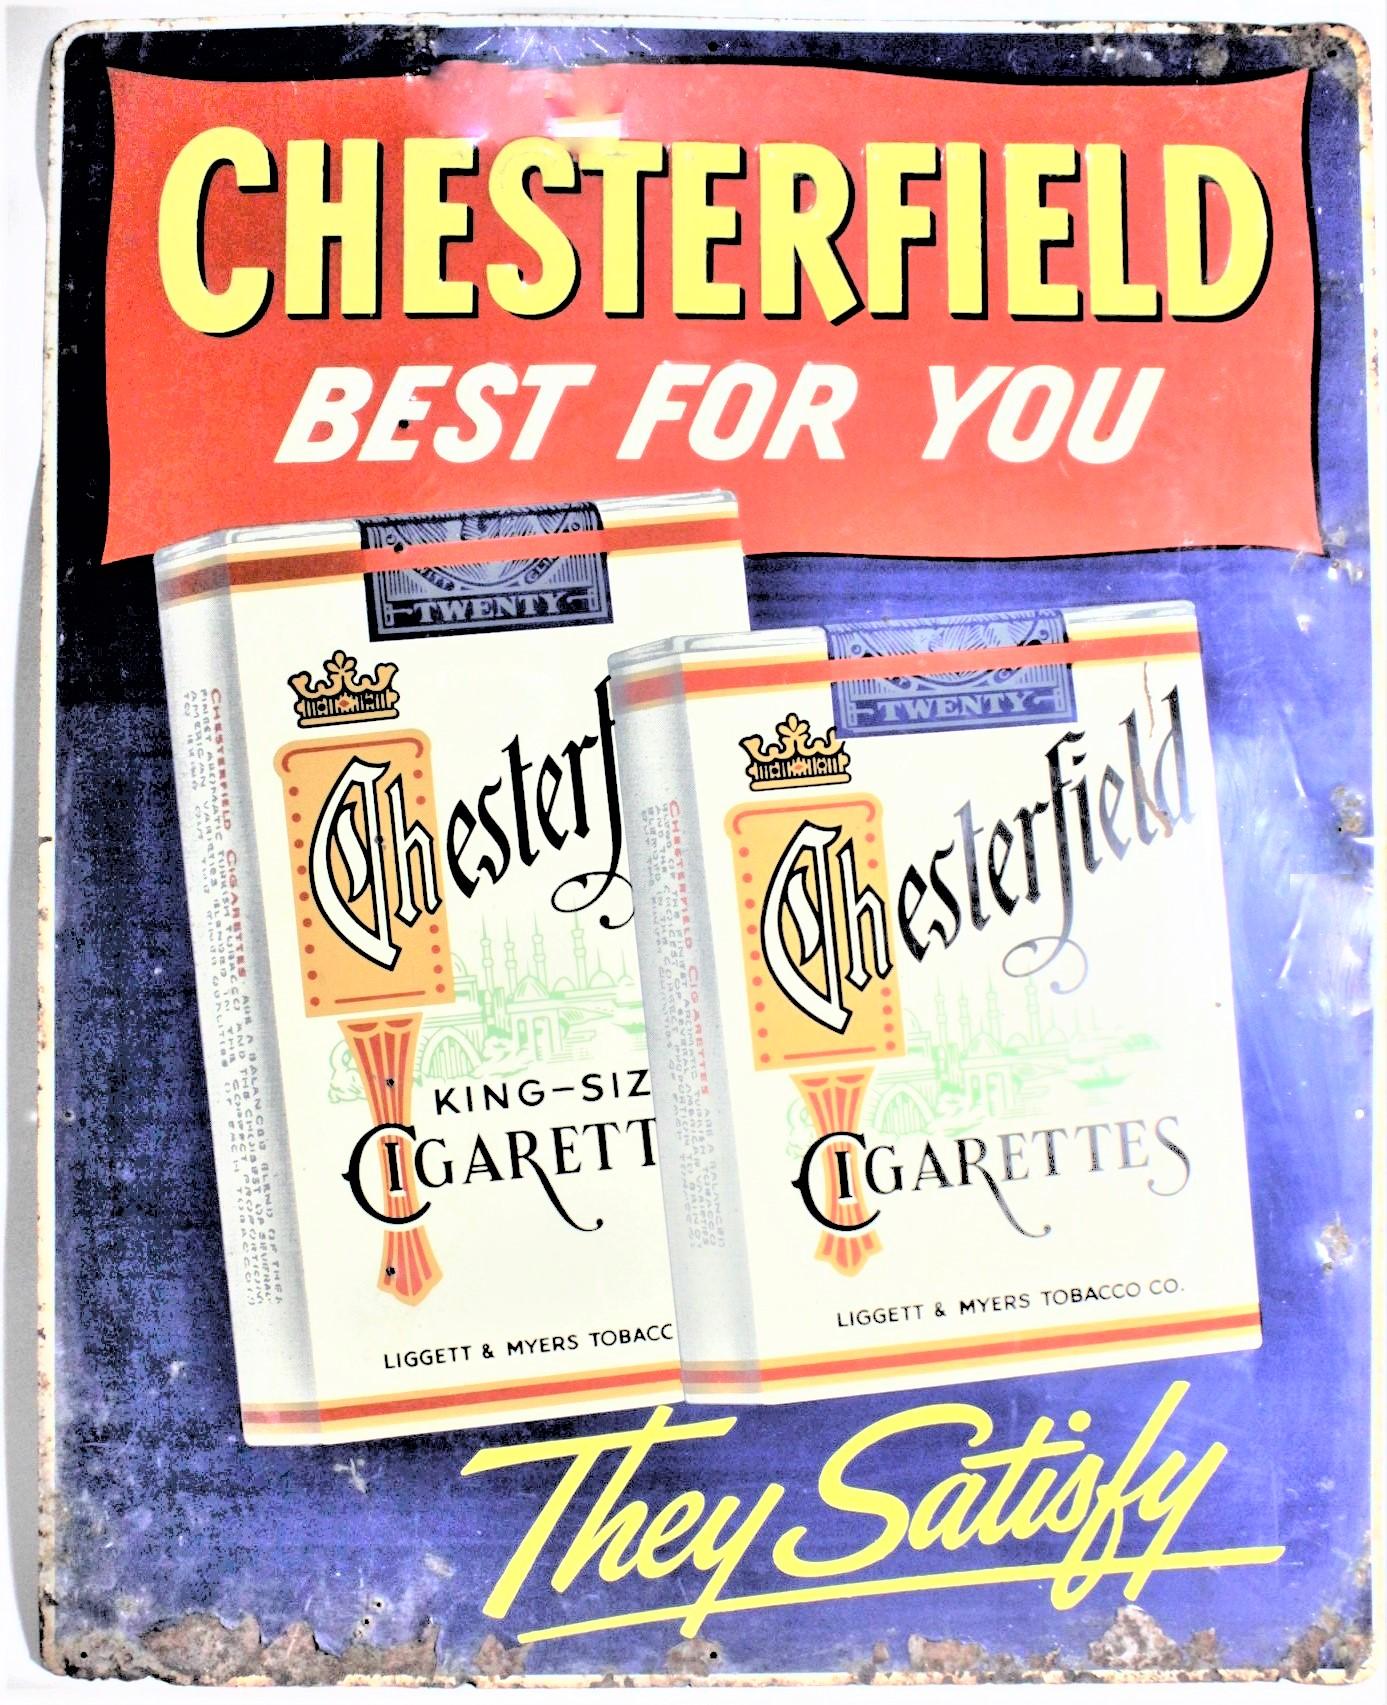 chesterfield sign